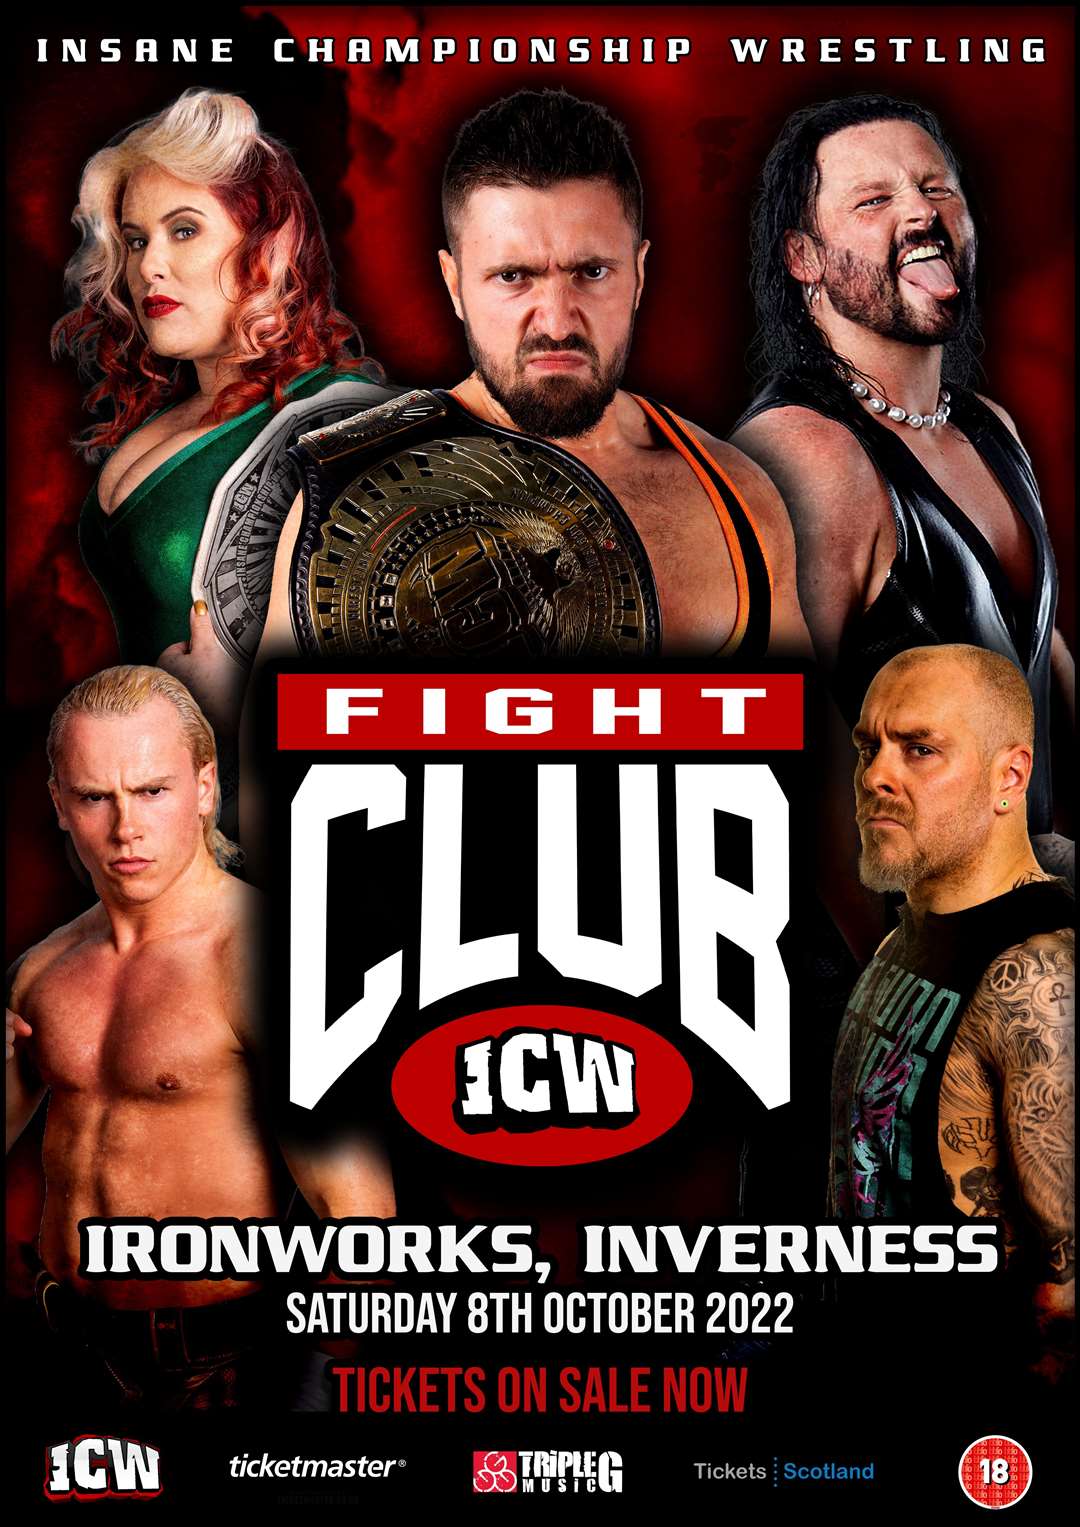 Fight Club for over-18s on Saturday evening at the Ironworks.